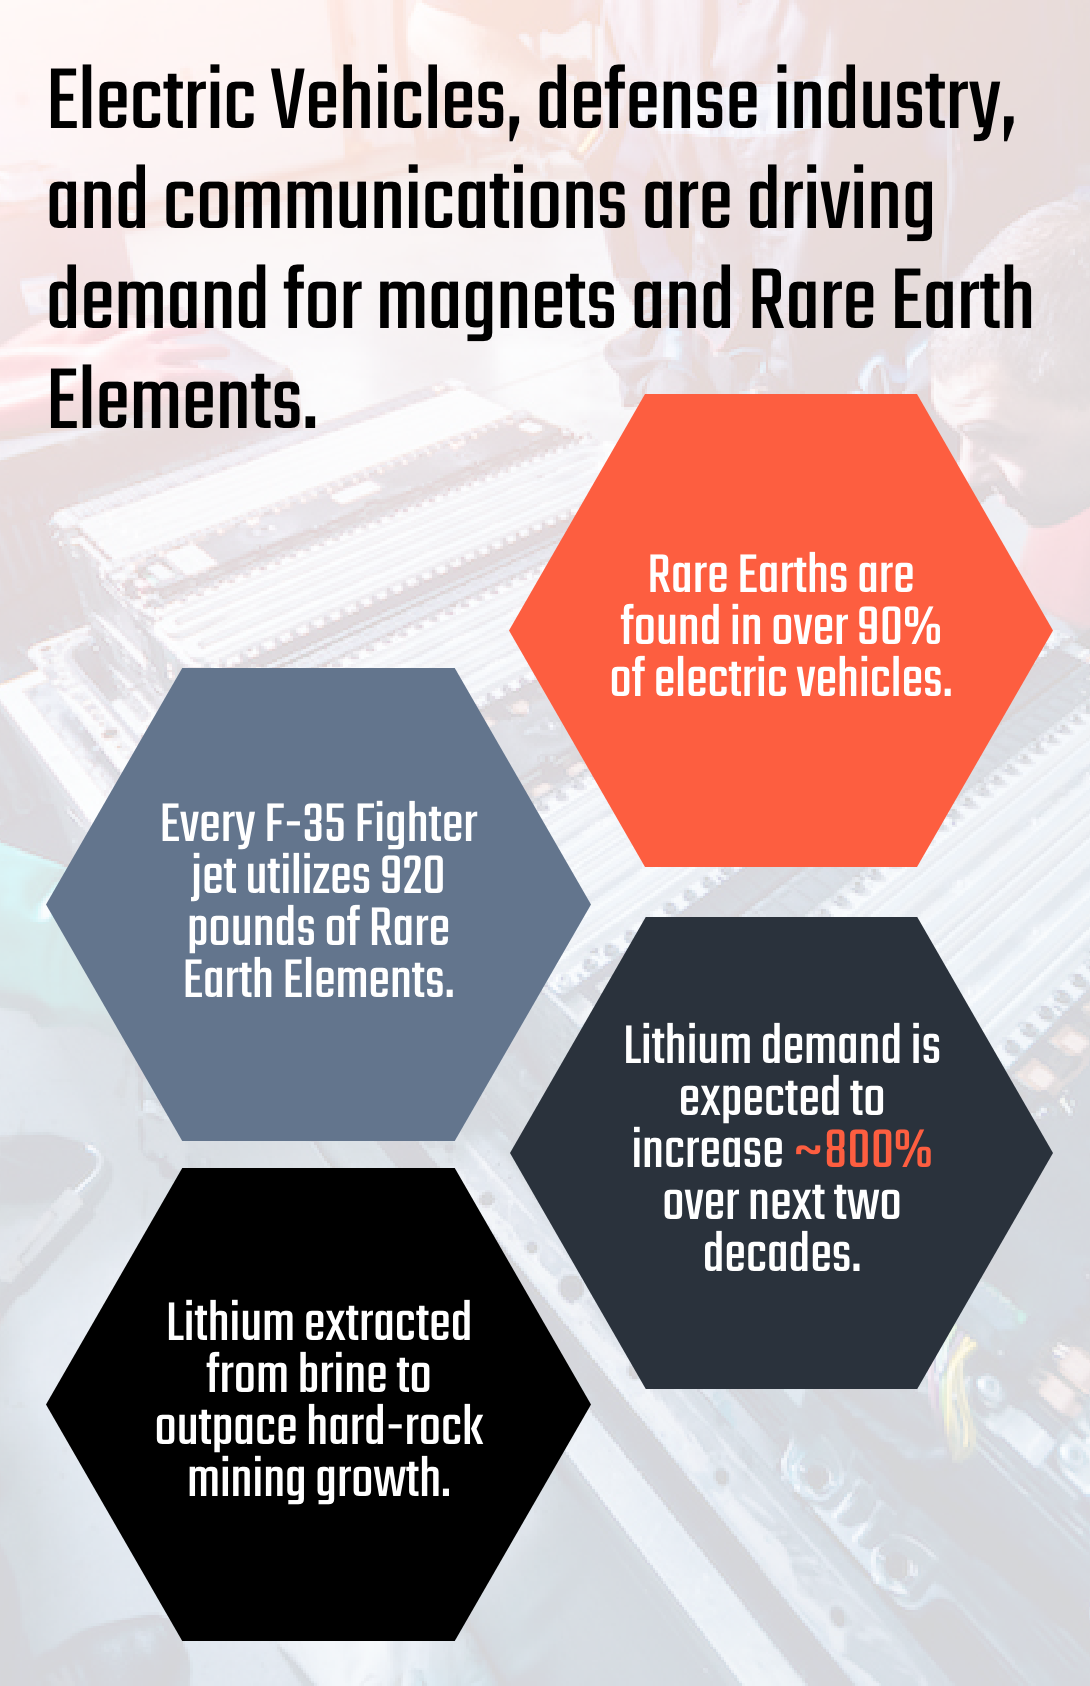 driving demand for magnets and rare earth elements